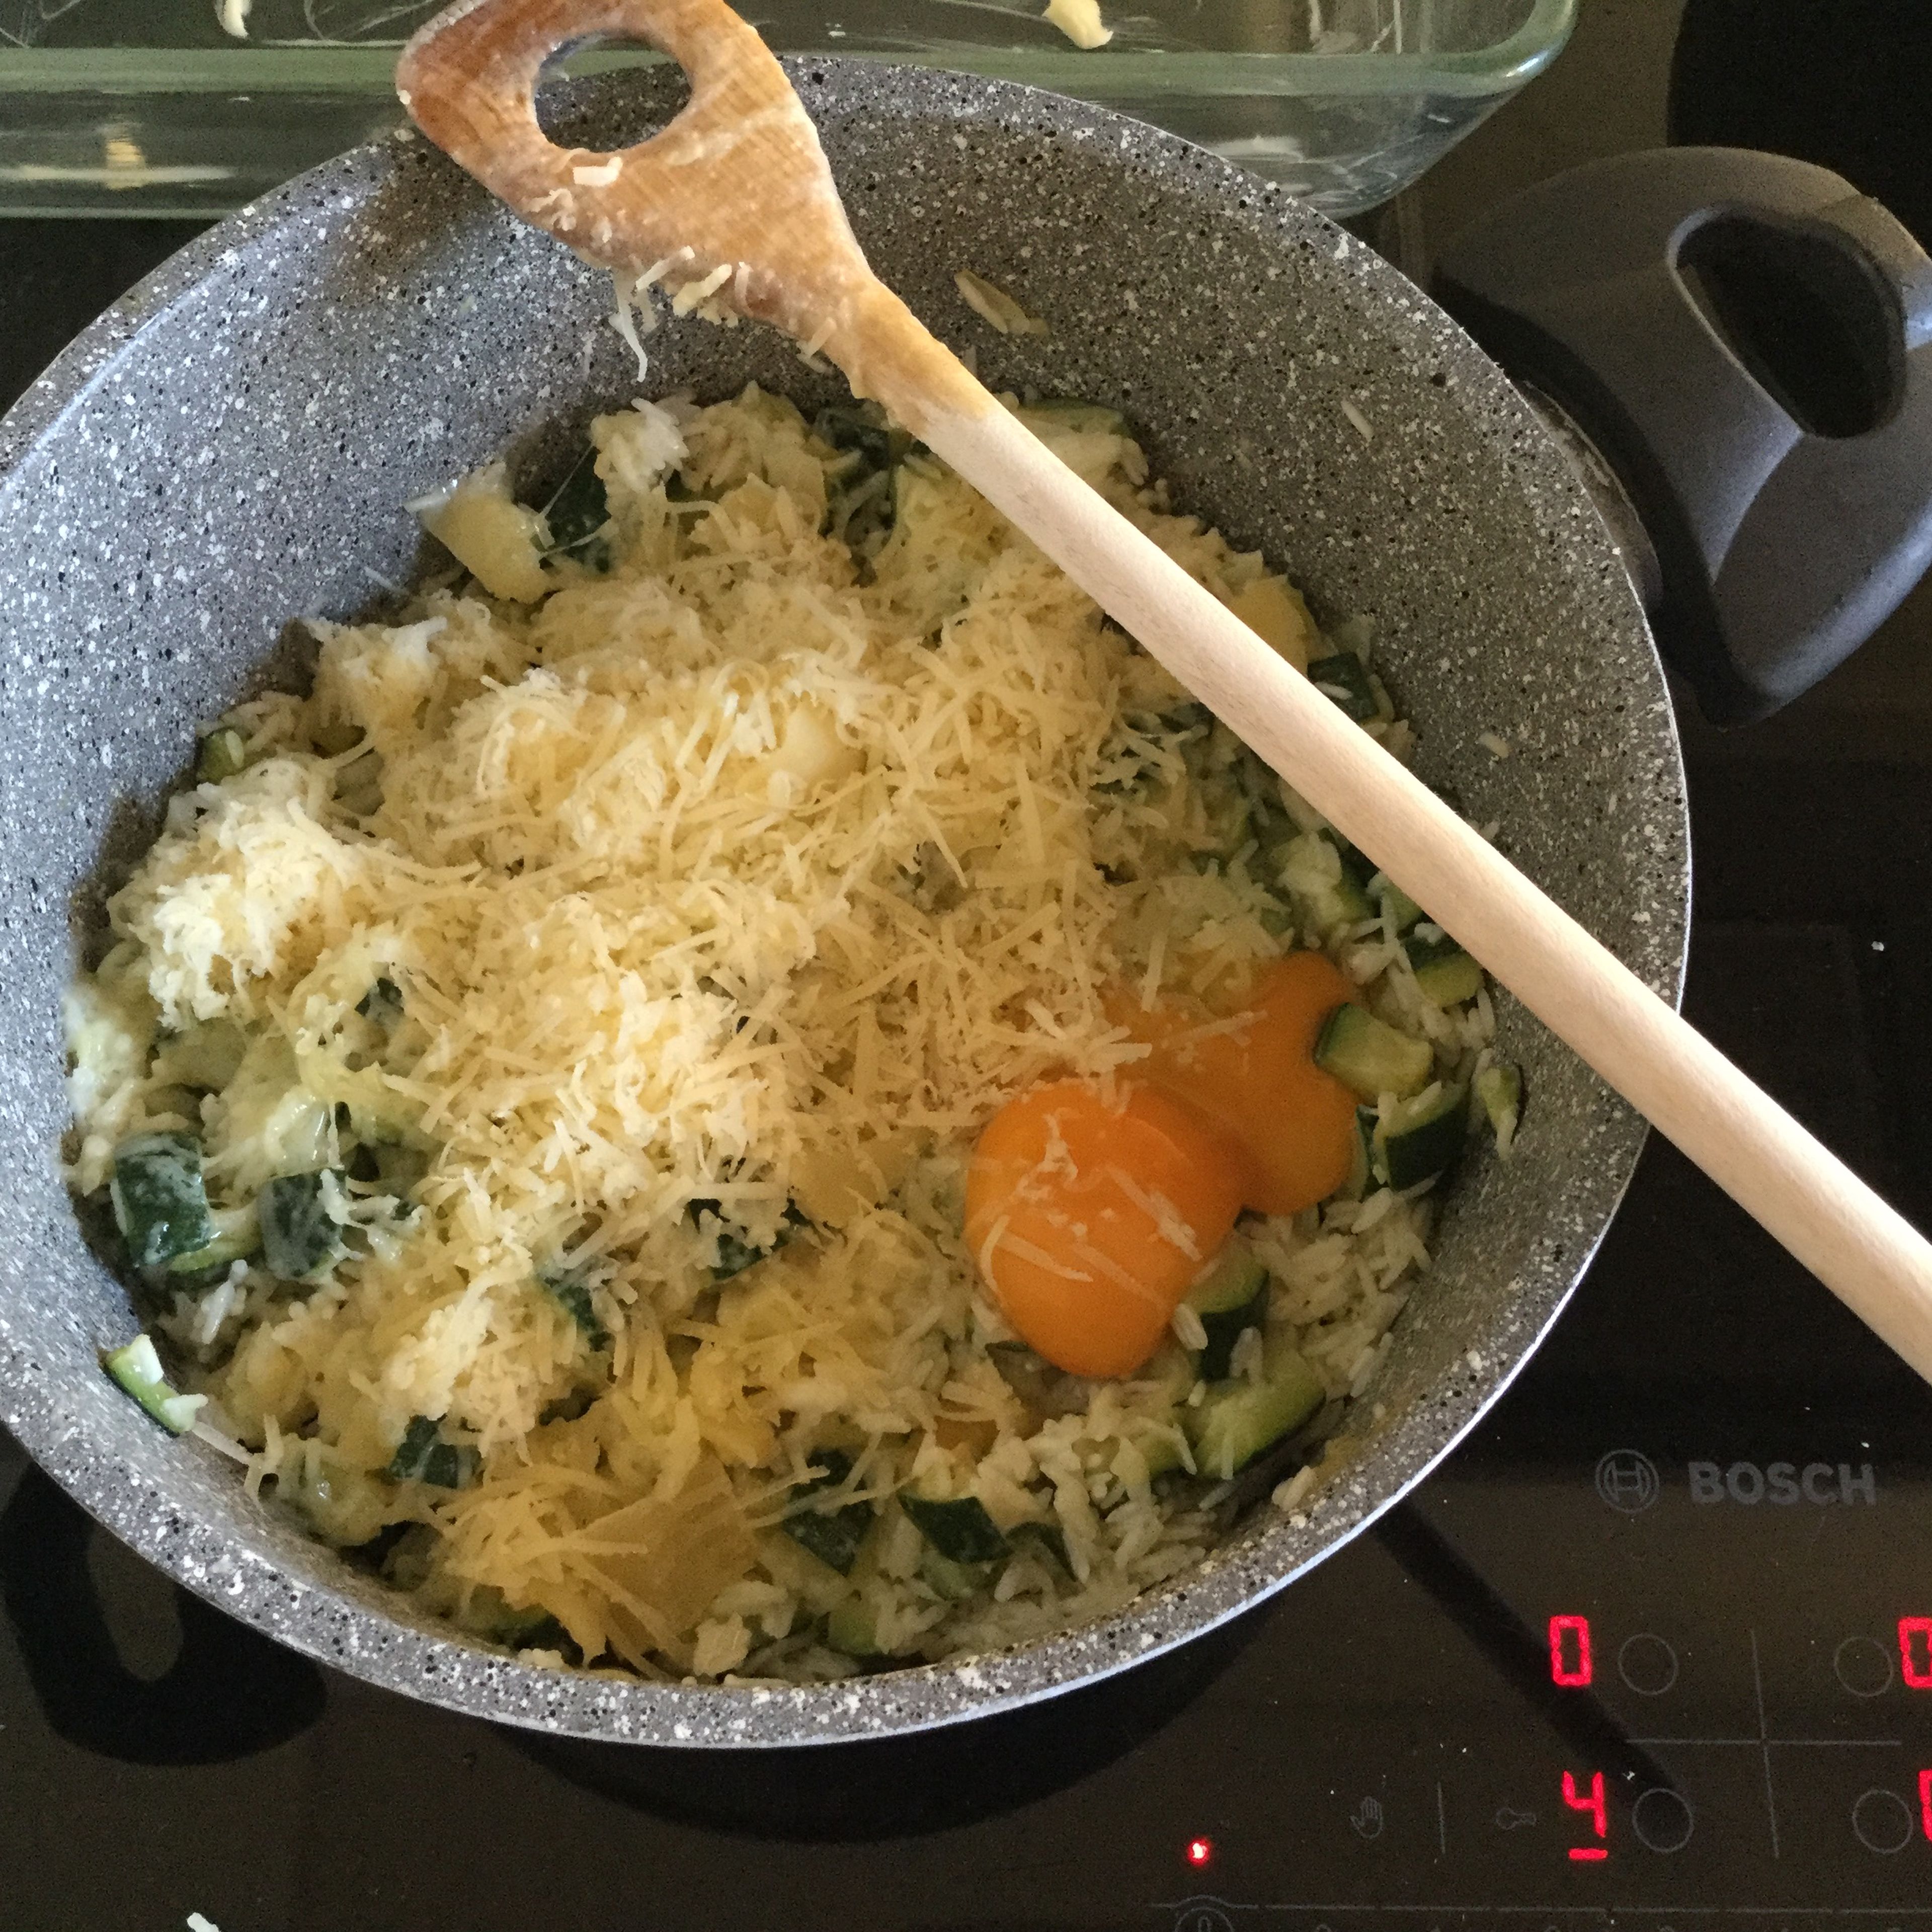 When the rice is cooked, add the egg and some grated cheese, at will